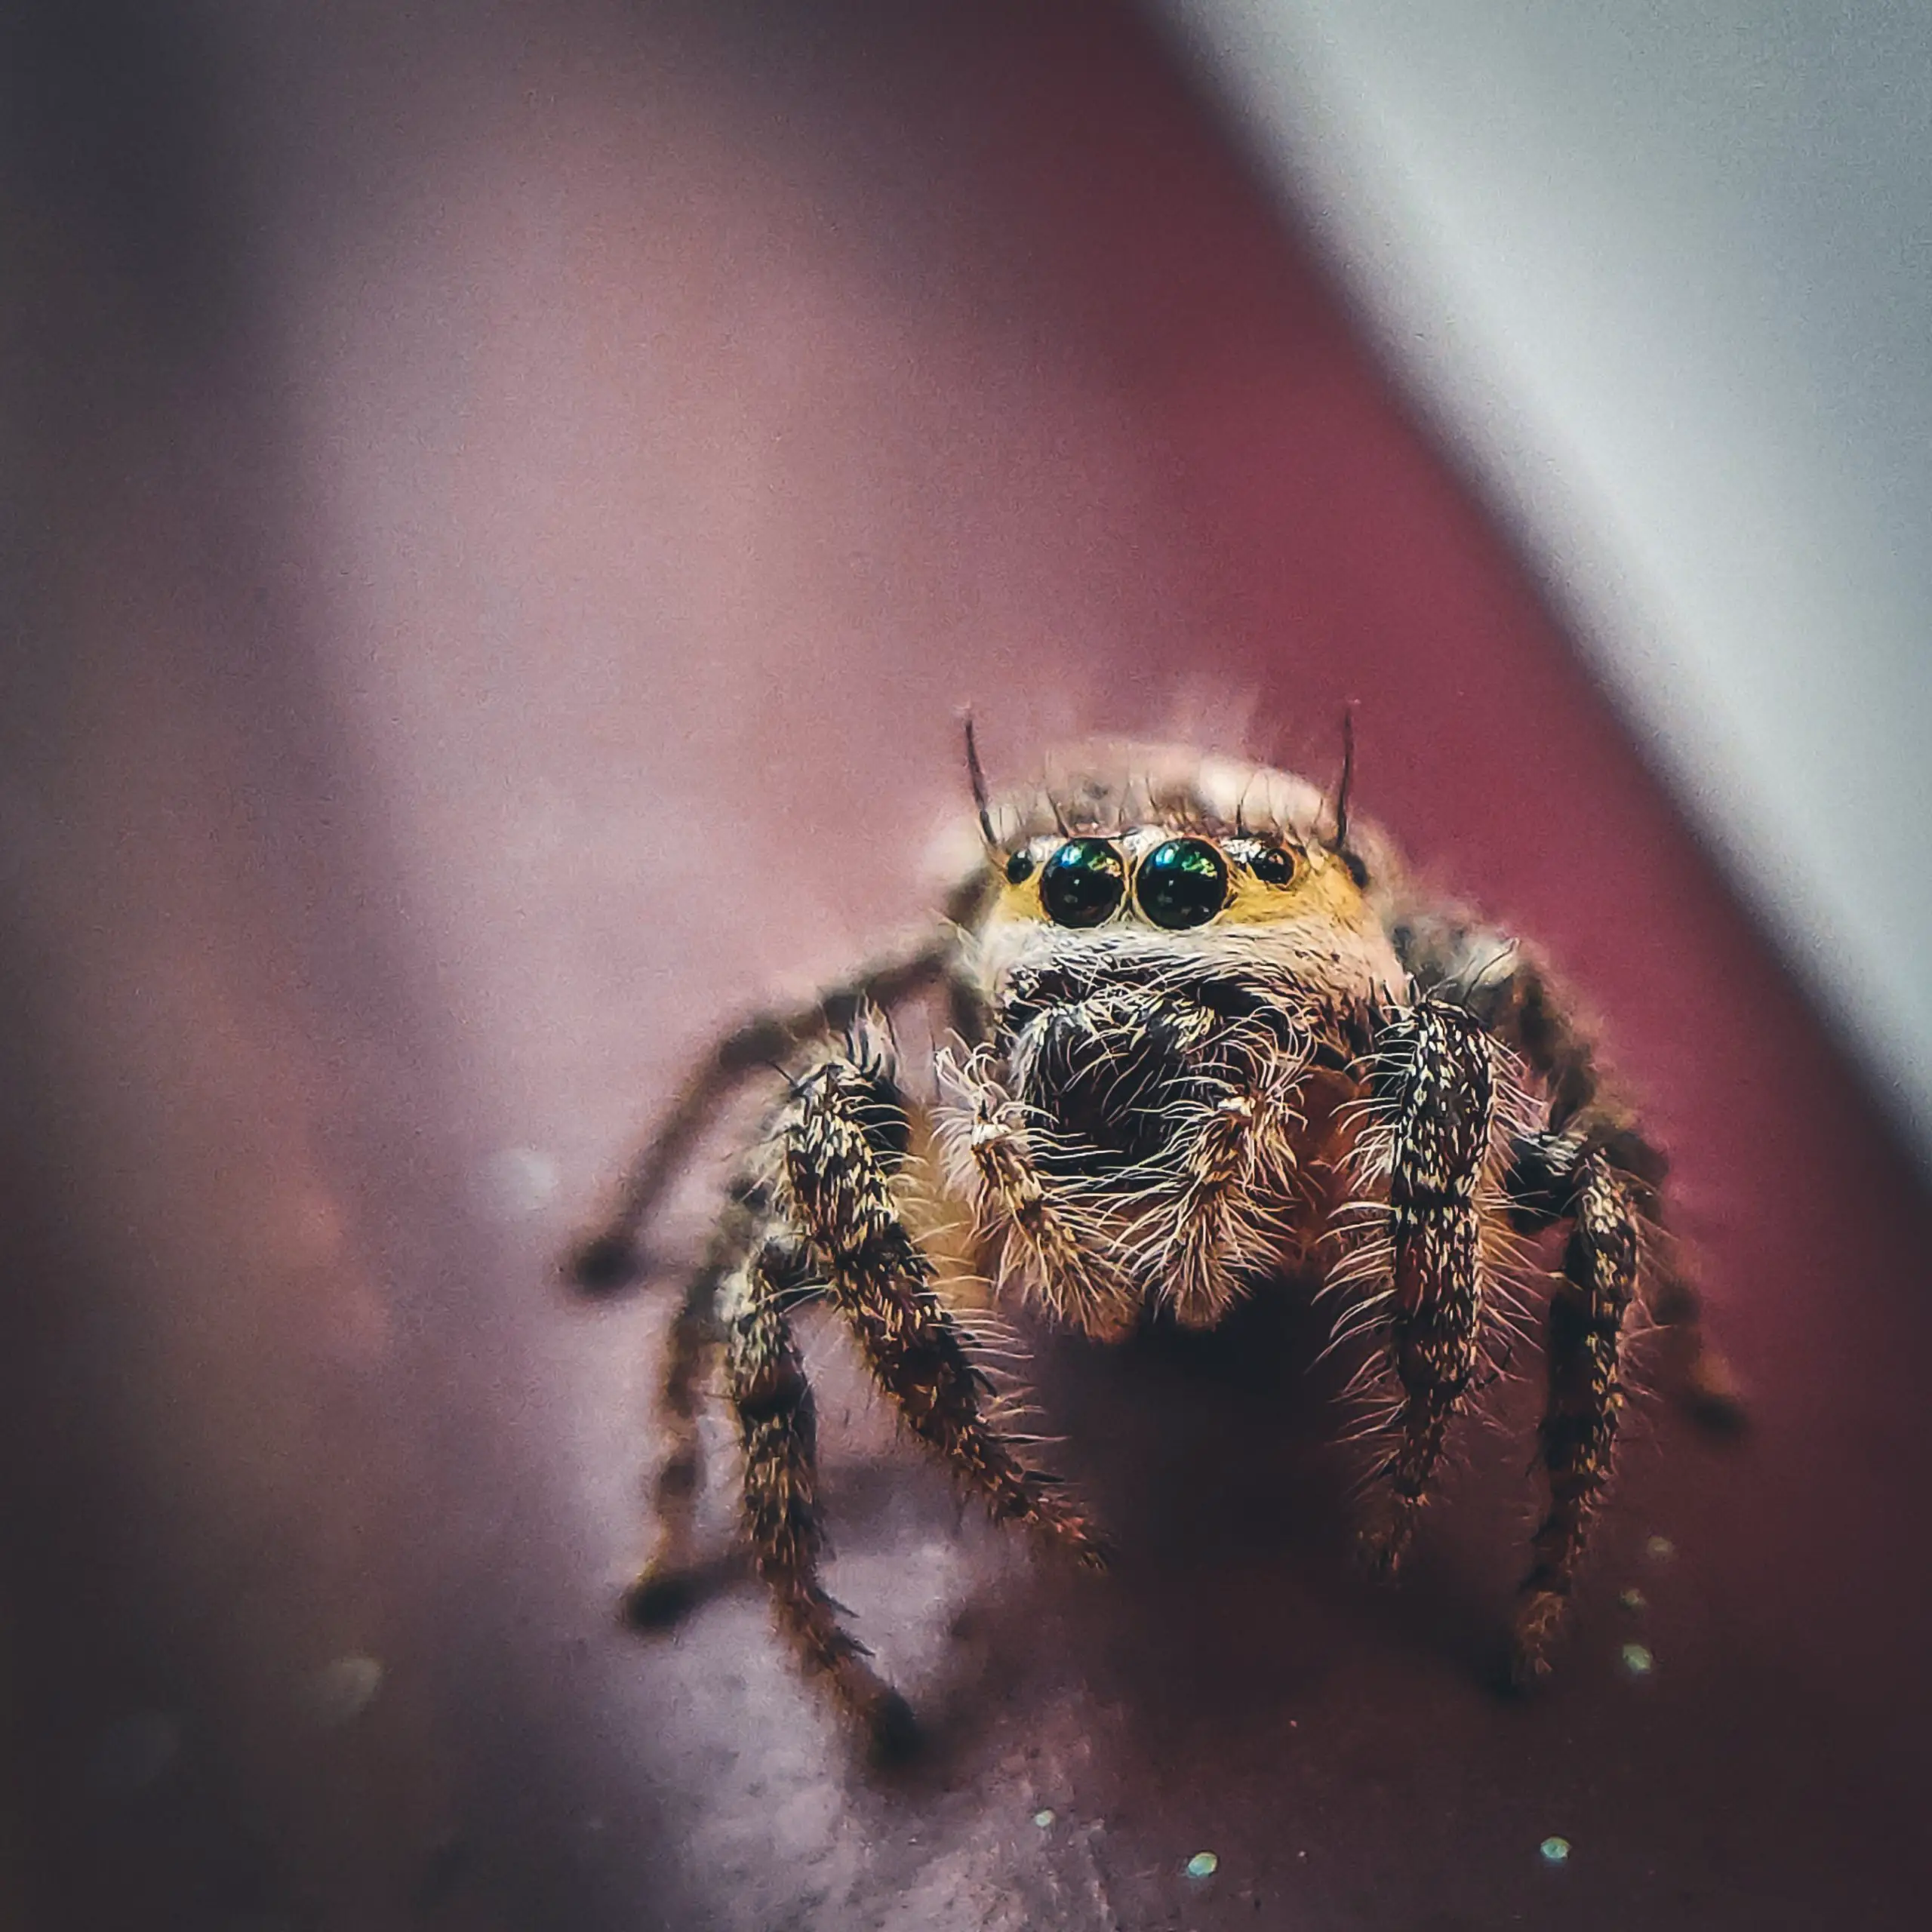 Close up image of a jumping spider.